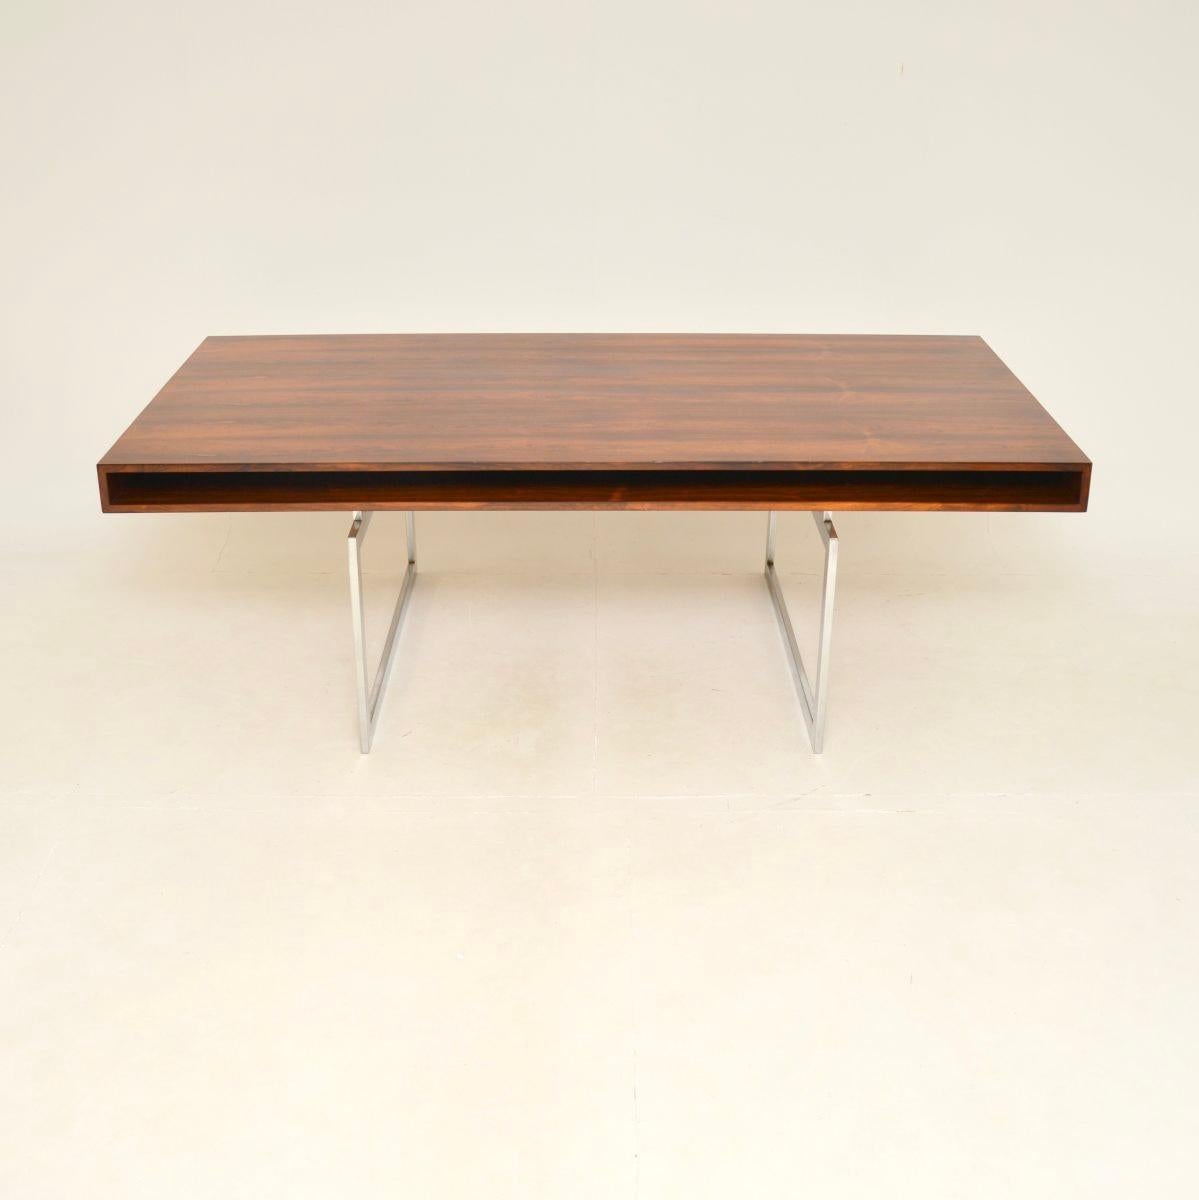 A stunning and iconic Danish vintage desk by Bodil Kjaer. This was made in Denmark by E. Pedersen & Søn, originally designed in 1959, this dates from the 1960’s.

It is an extremely rare model, larger than the normal model 901 desk but with a very